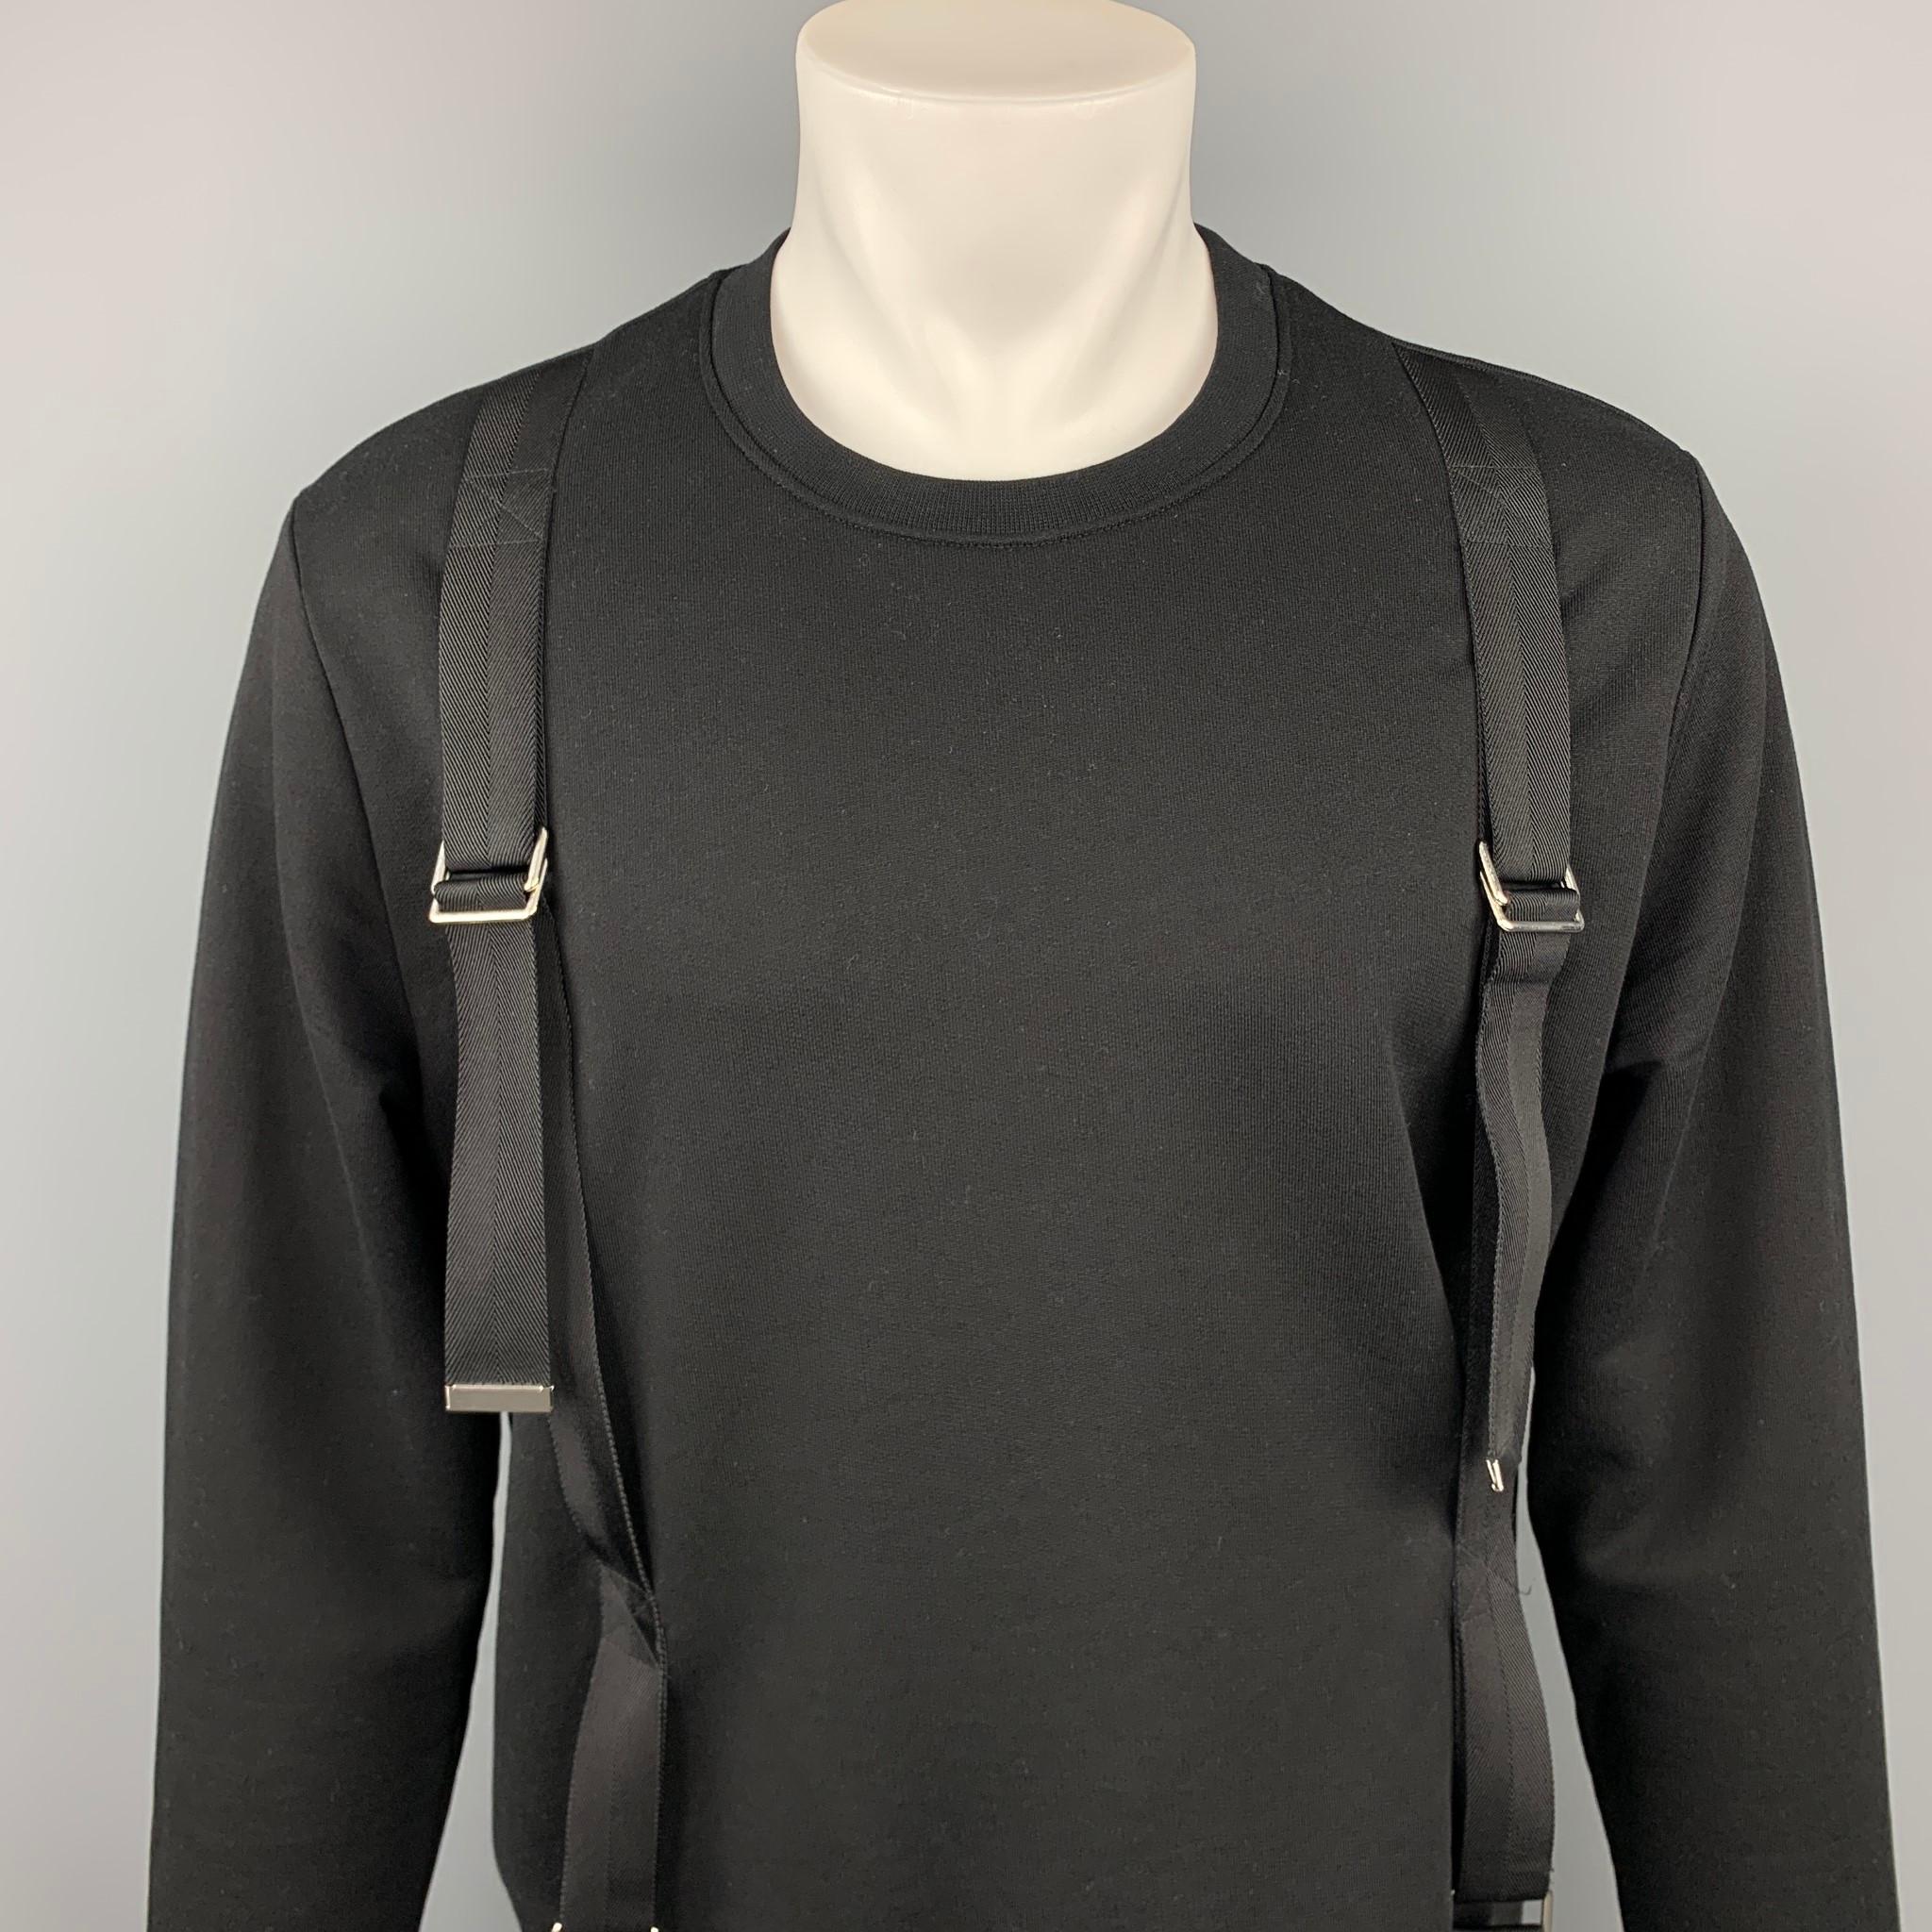 LES HOMMES sweatshirt comes in a black cotton with bondage strap details featuring a crew-neck.

Excellent Pre-Owned Condition.
Marked: M

Measurements:

Shoulder: 20 in. 
Chest: 46 in. 
Sleeve: 27 in. 
Length: 26.5 in. 